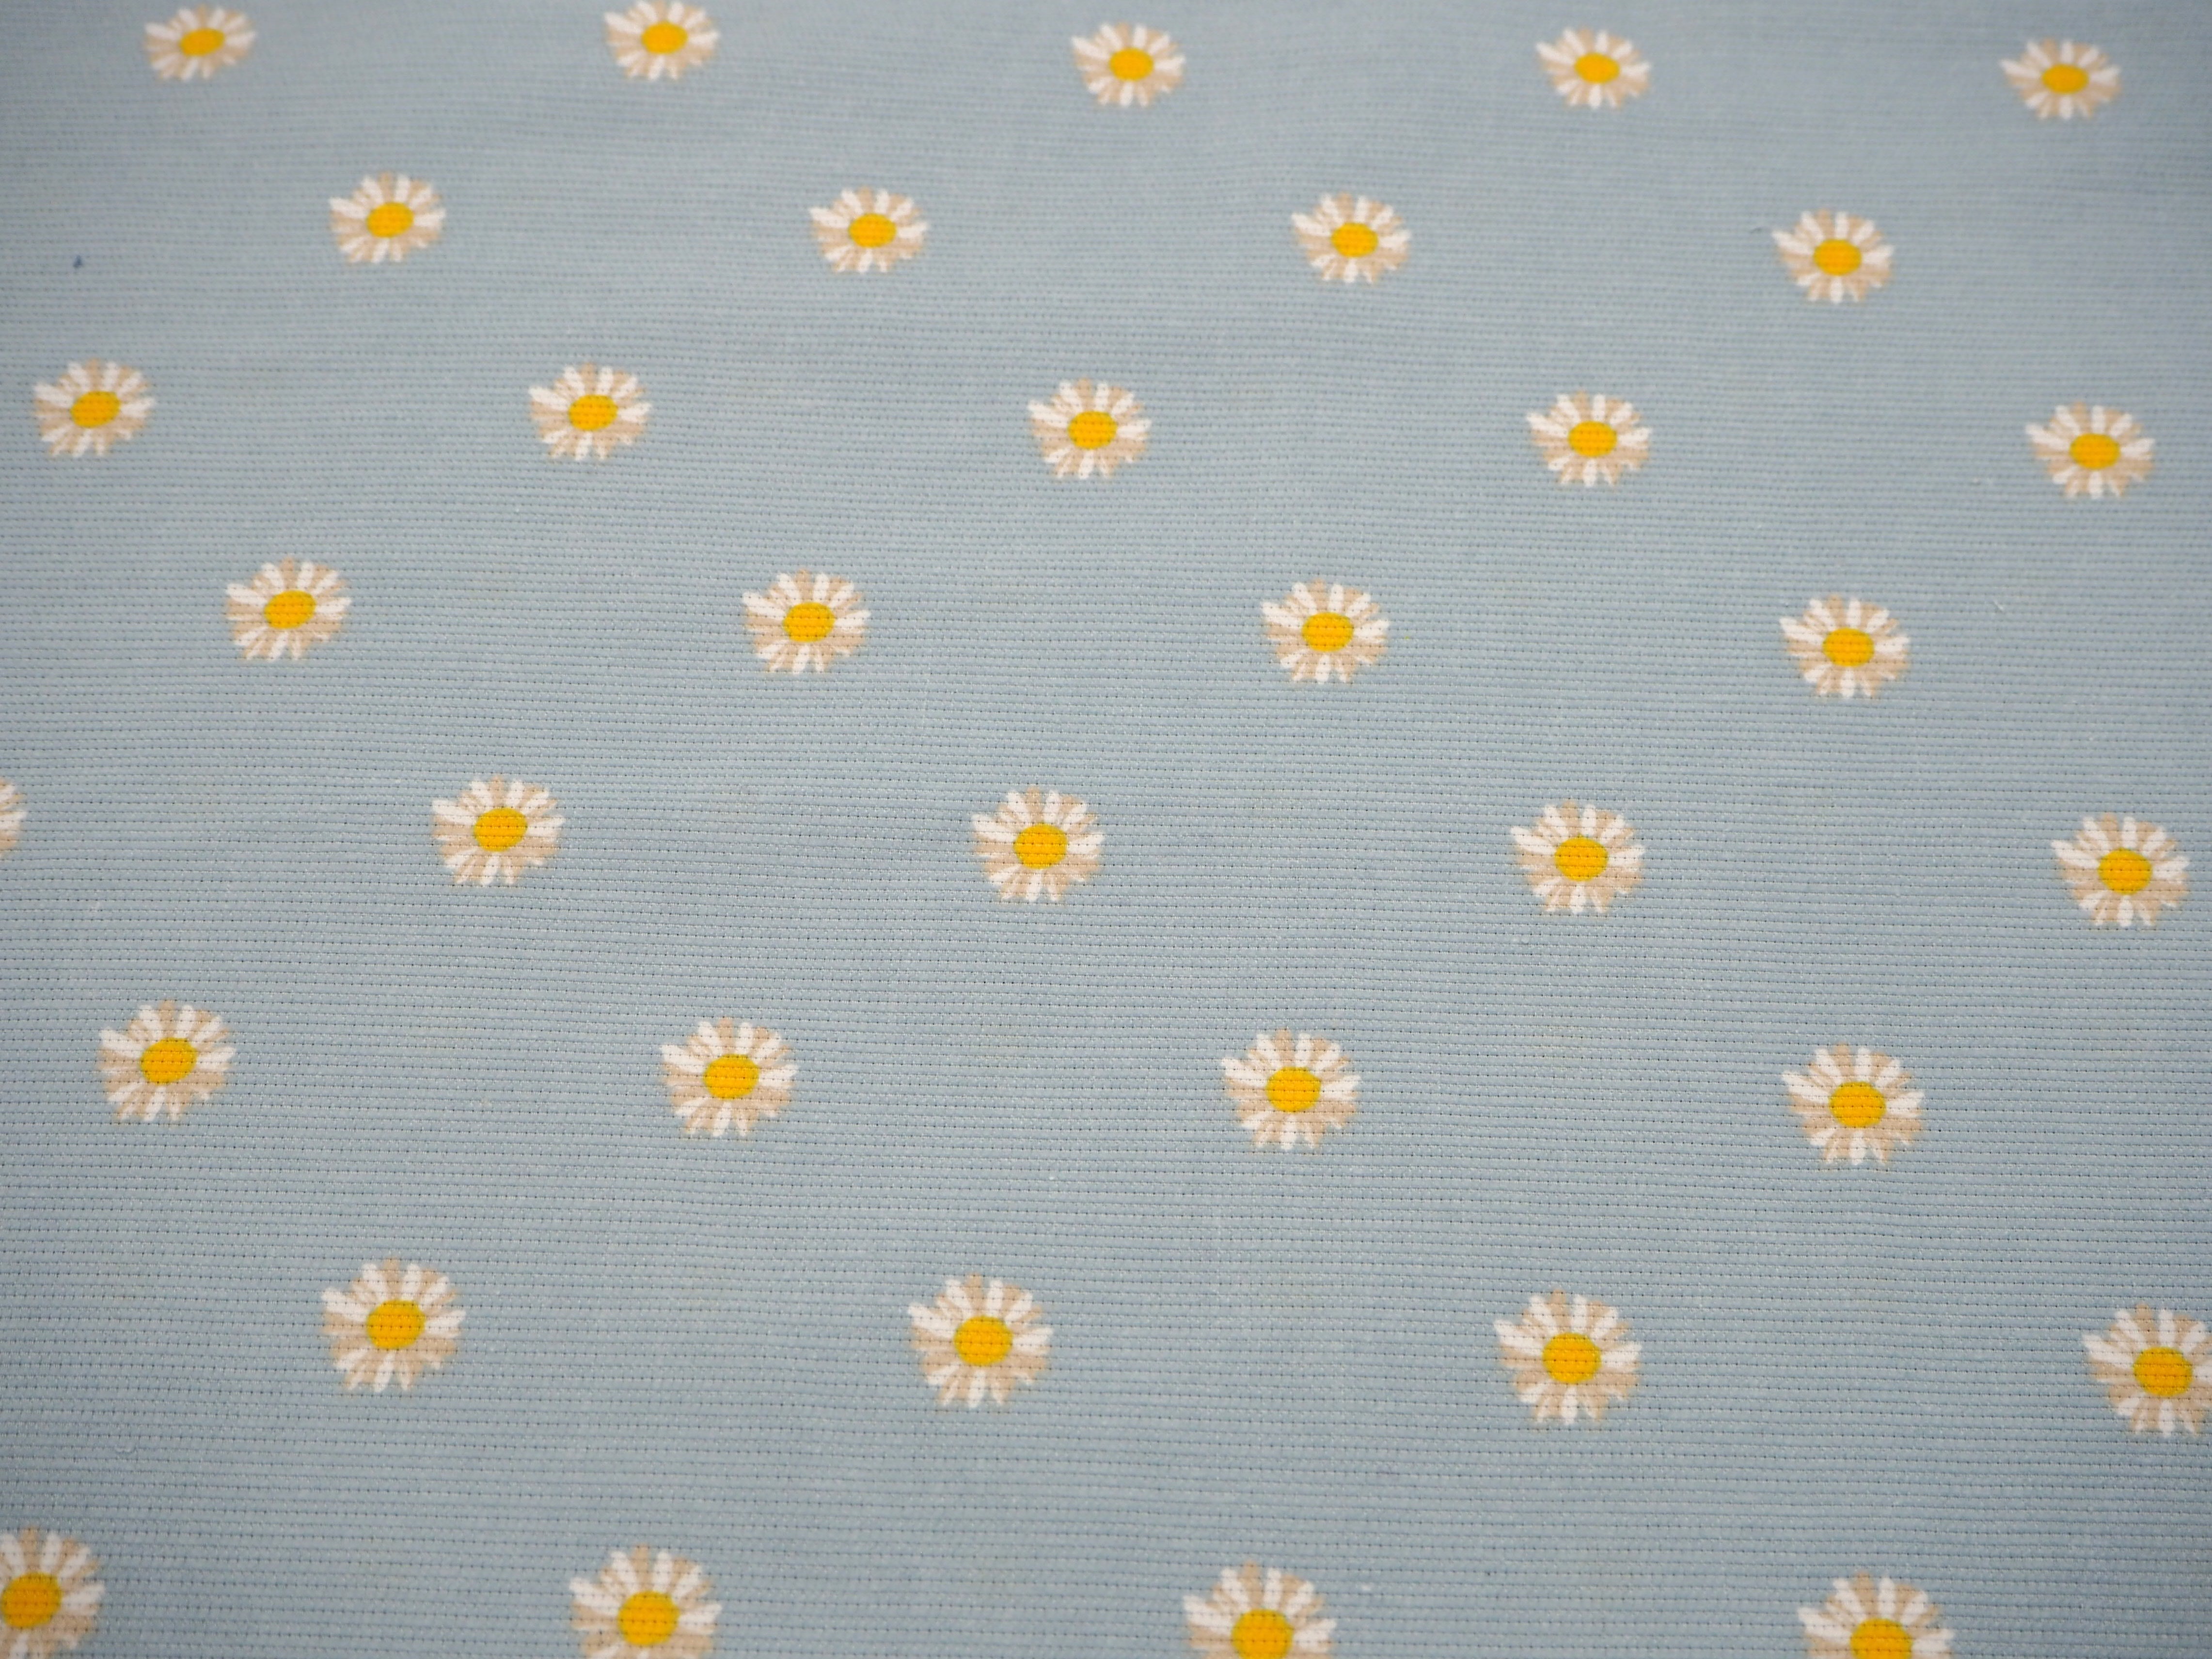 Fabric view of A Sack Of Wheat, featuring soft yellow, spring daisy's on baby blue corduroy 100% cotton fabric